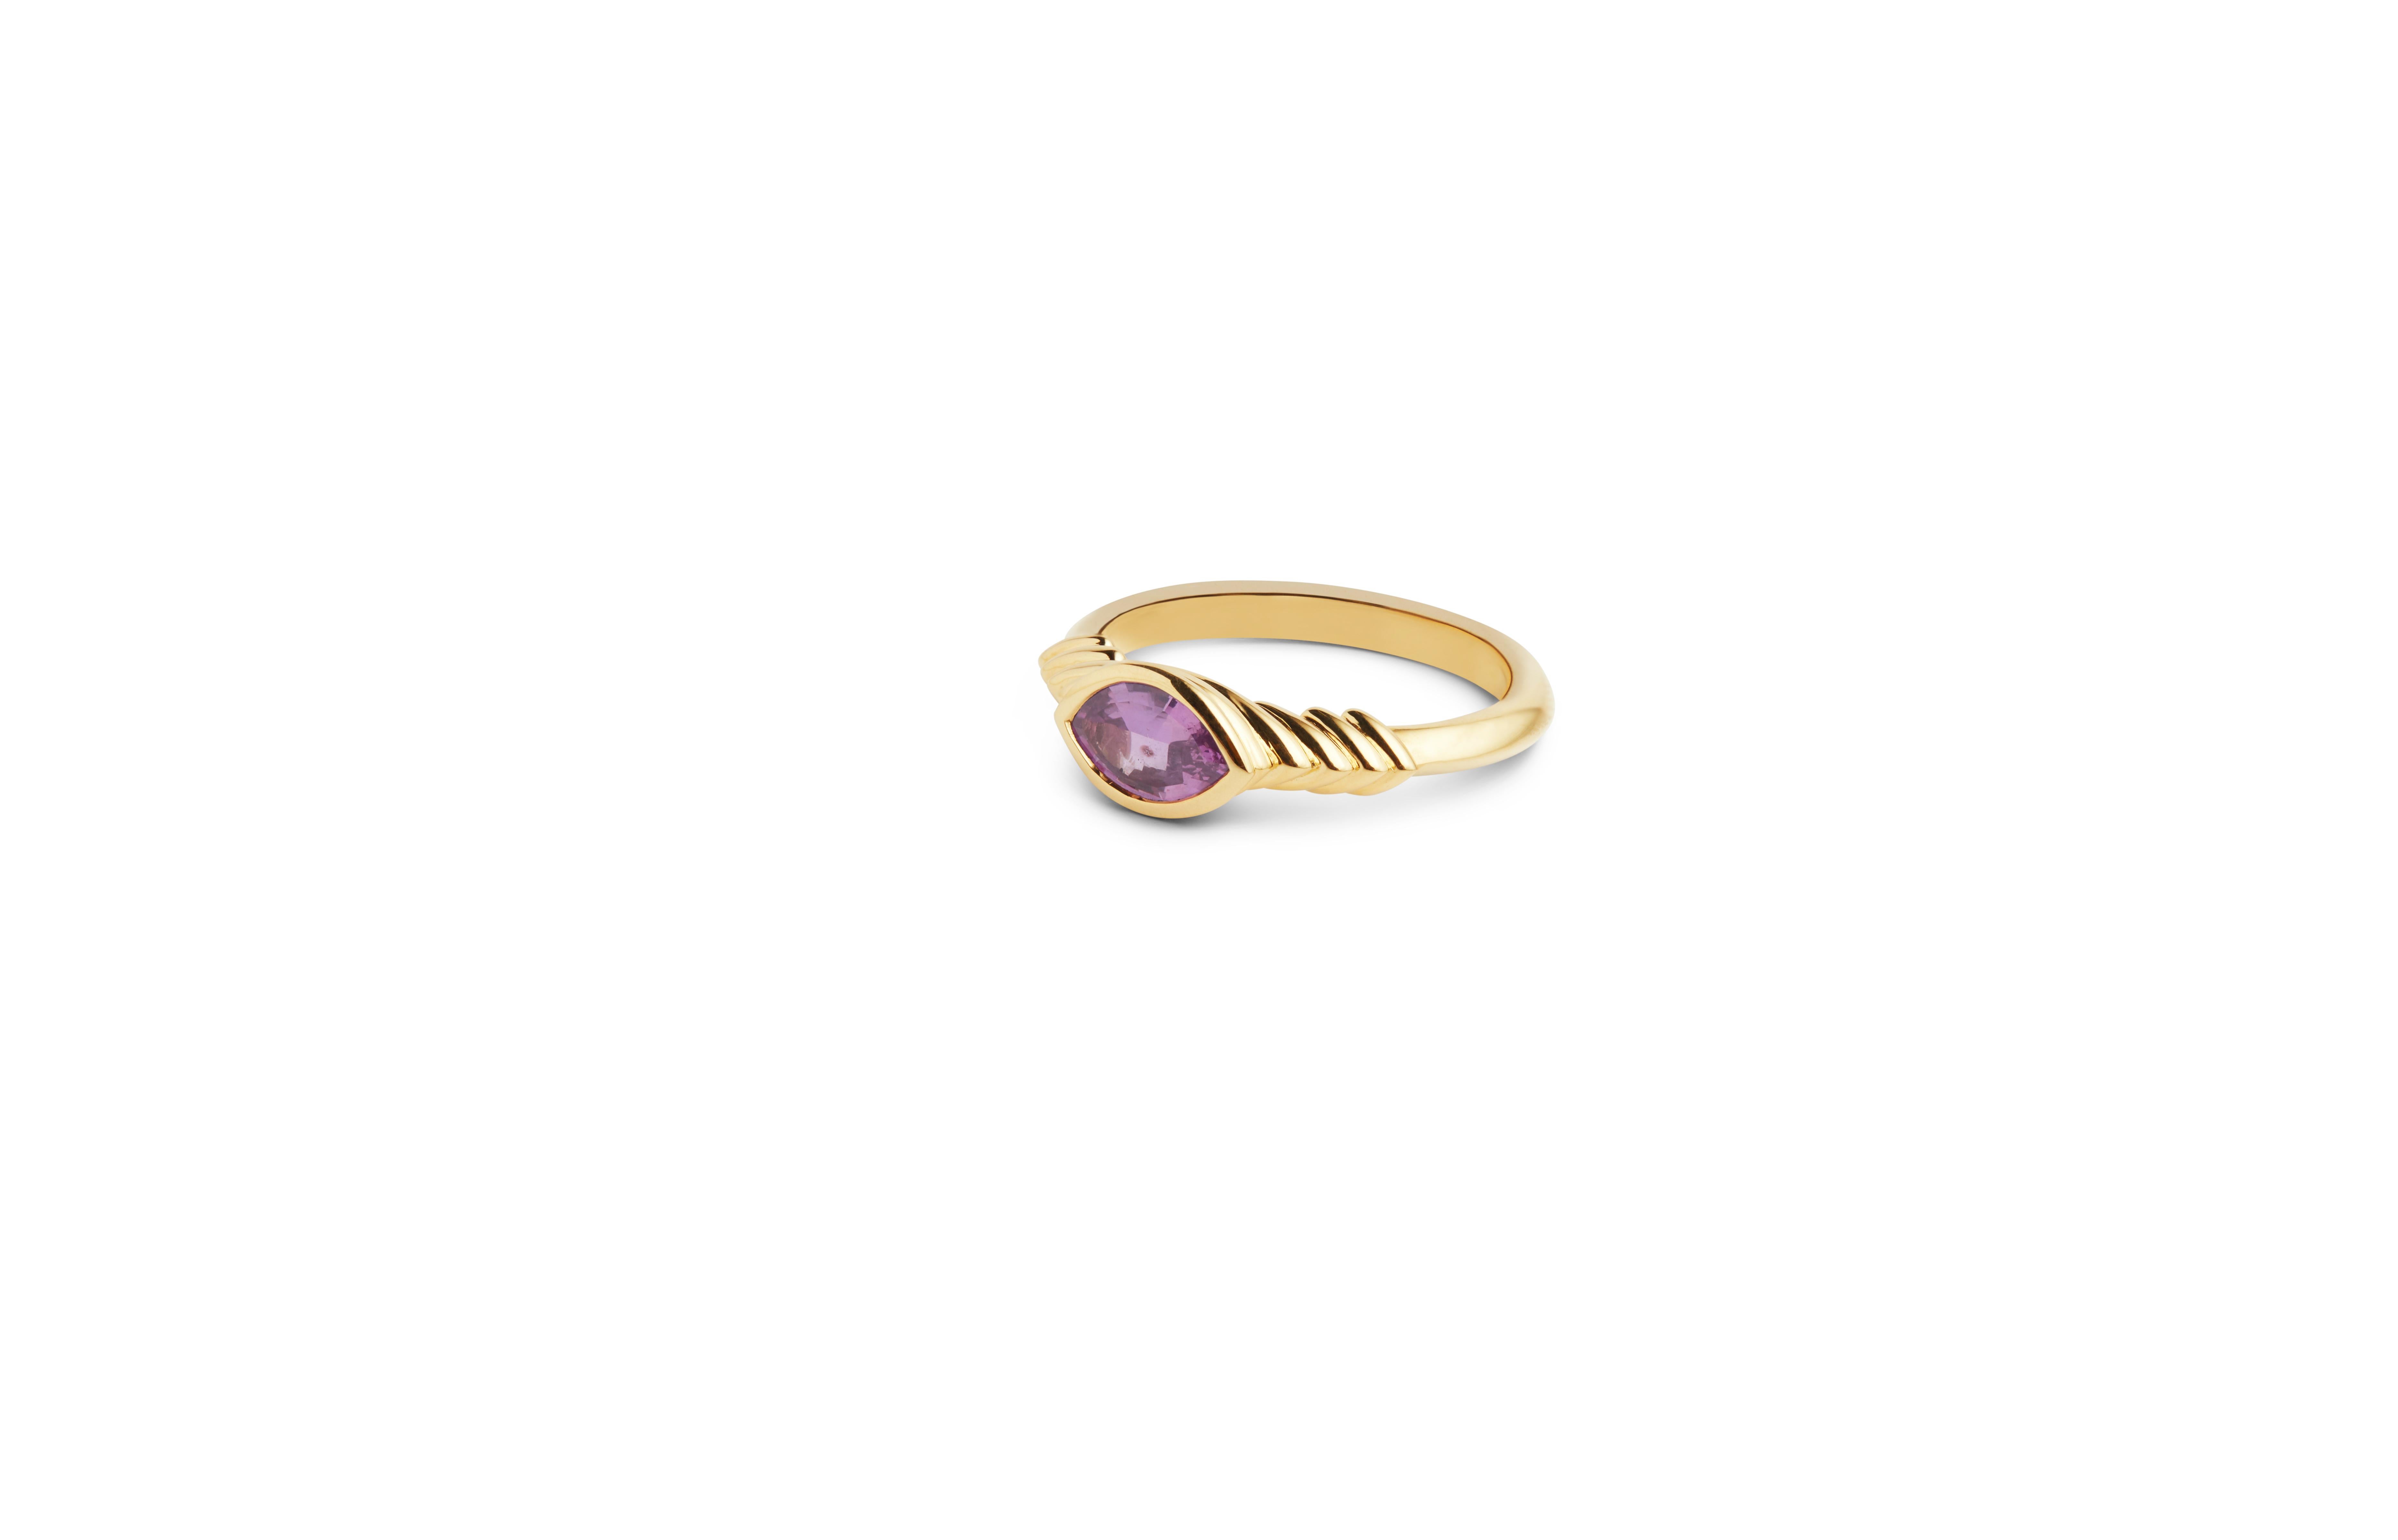 This ring is one of a kind.

18ct yellow gold band designed around a 7.2ct deep pink marquise (8x5mm) Sapphire hand-selected by Kasun on his summer trip back home to Sri Lanka in 2023.

Made start to finish in London, using 100% recycled precious